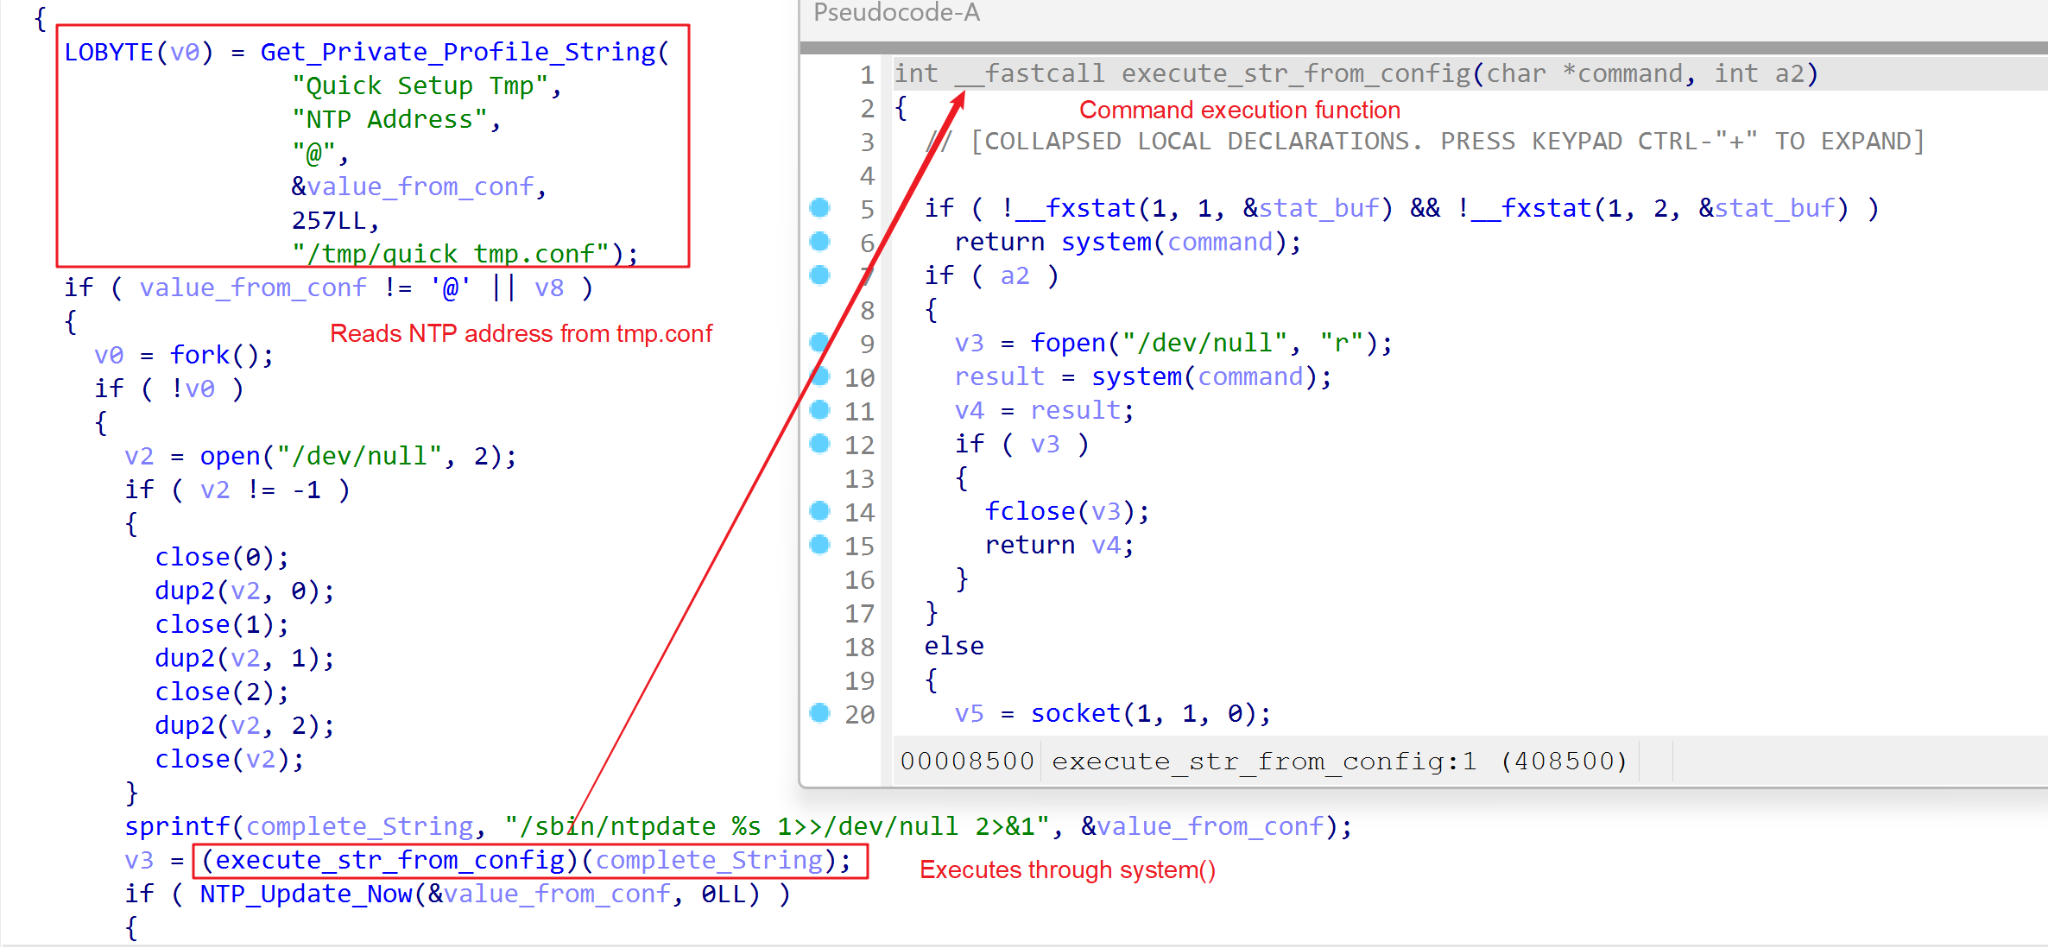 Image 2 is a screenshot of two windows of code. Highlighted in red is the code that reads the NTP address from tmp.conf. Highlighted in red is the line of code for the command execution function, displayed in a separate window. It executes through system().